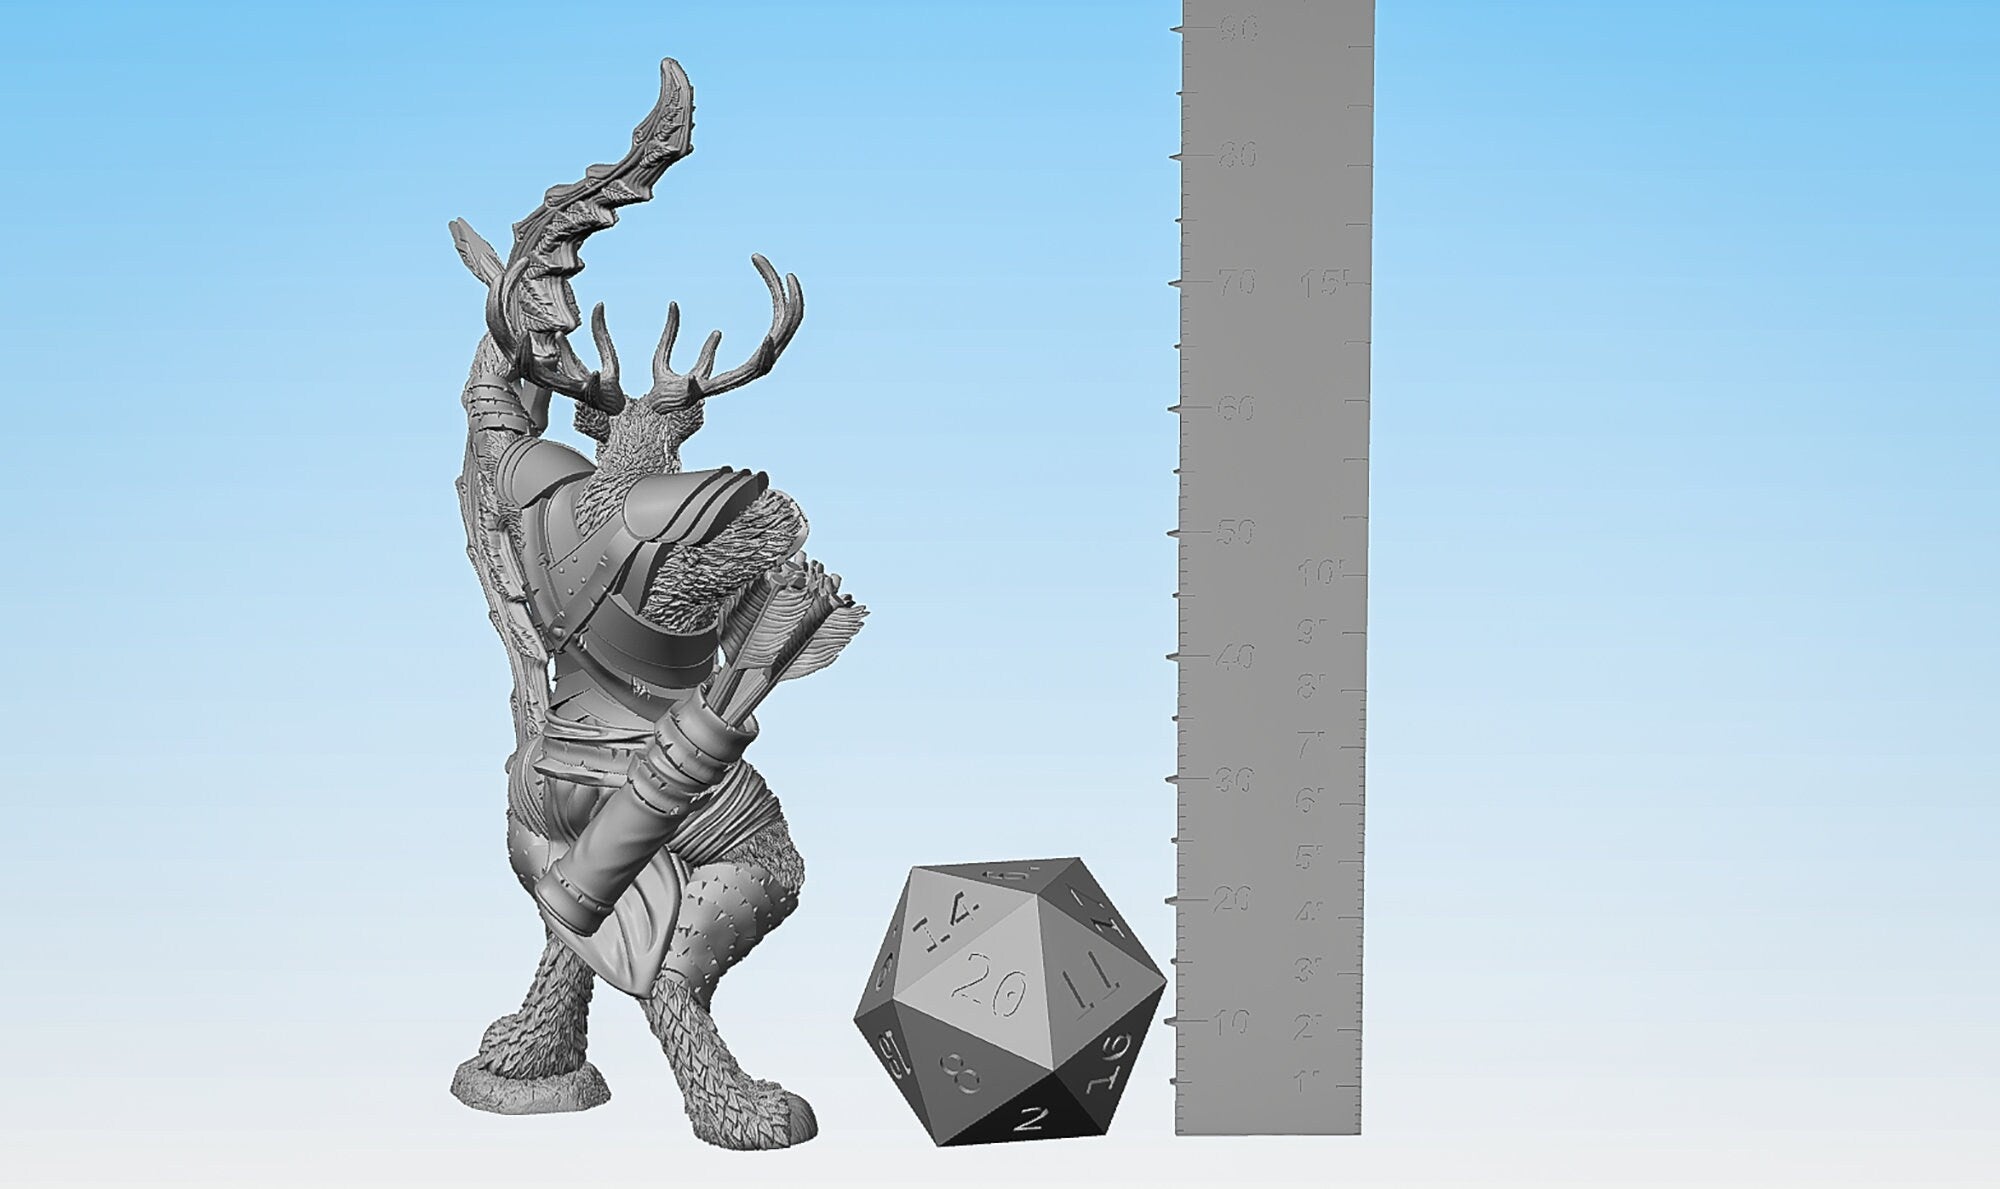 ELK FOLK "Ranger" | Dungeons and Dragons | | DnD | Pathfinder | Tabletop | RPG | Hero Size | 28 mm-Role Playing Miniatures